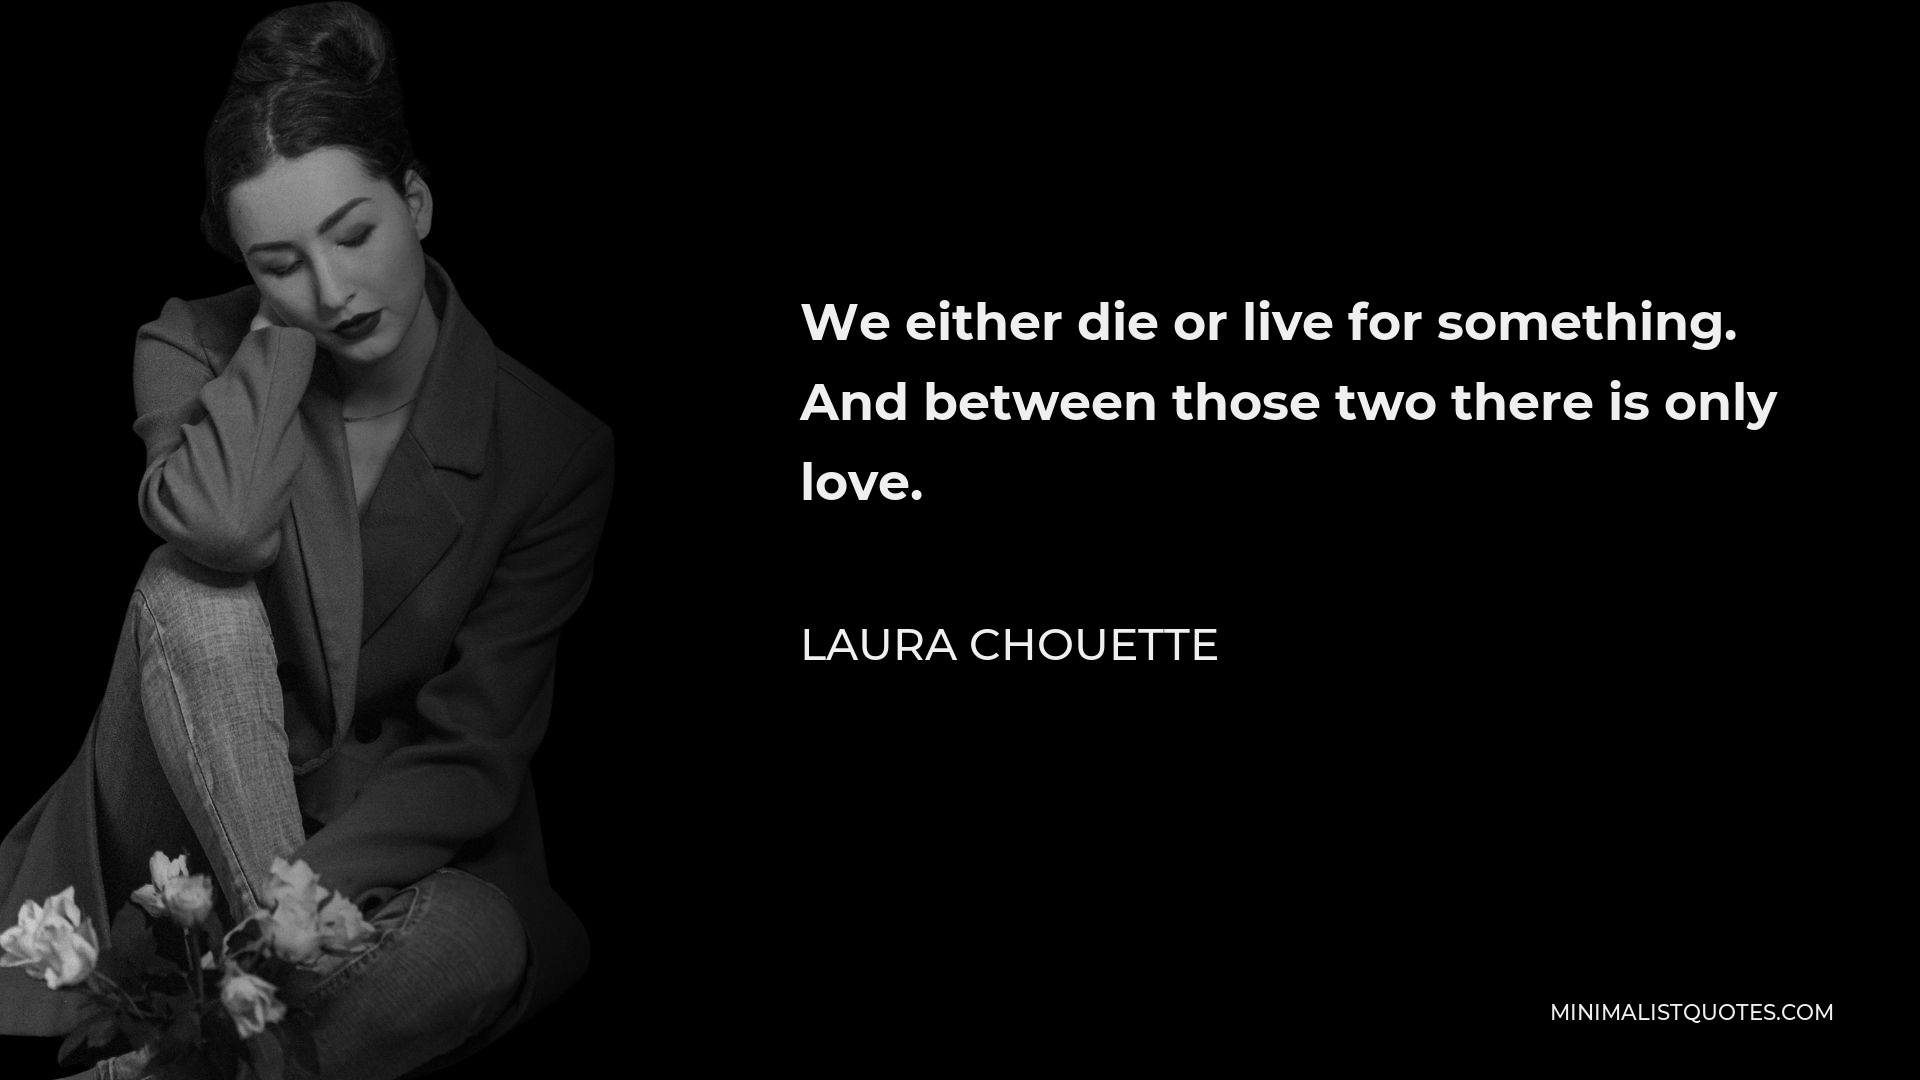 Laura Chouette Quote - We either die or live for something. And between those two there is only love.